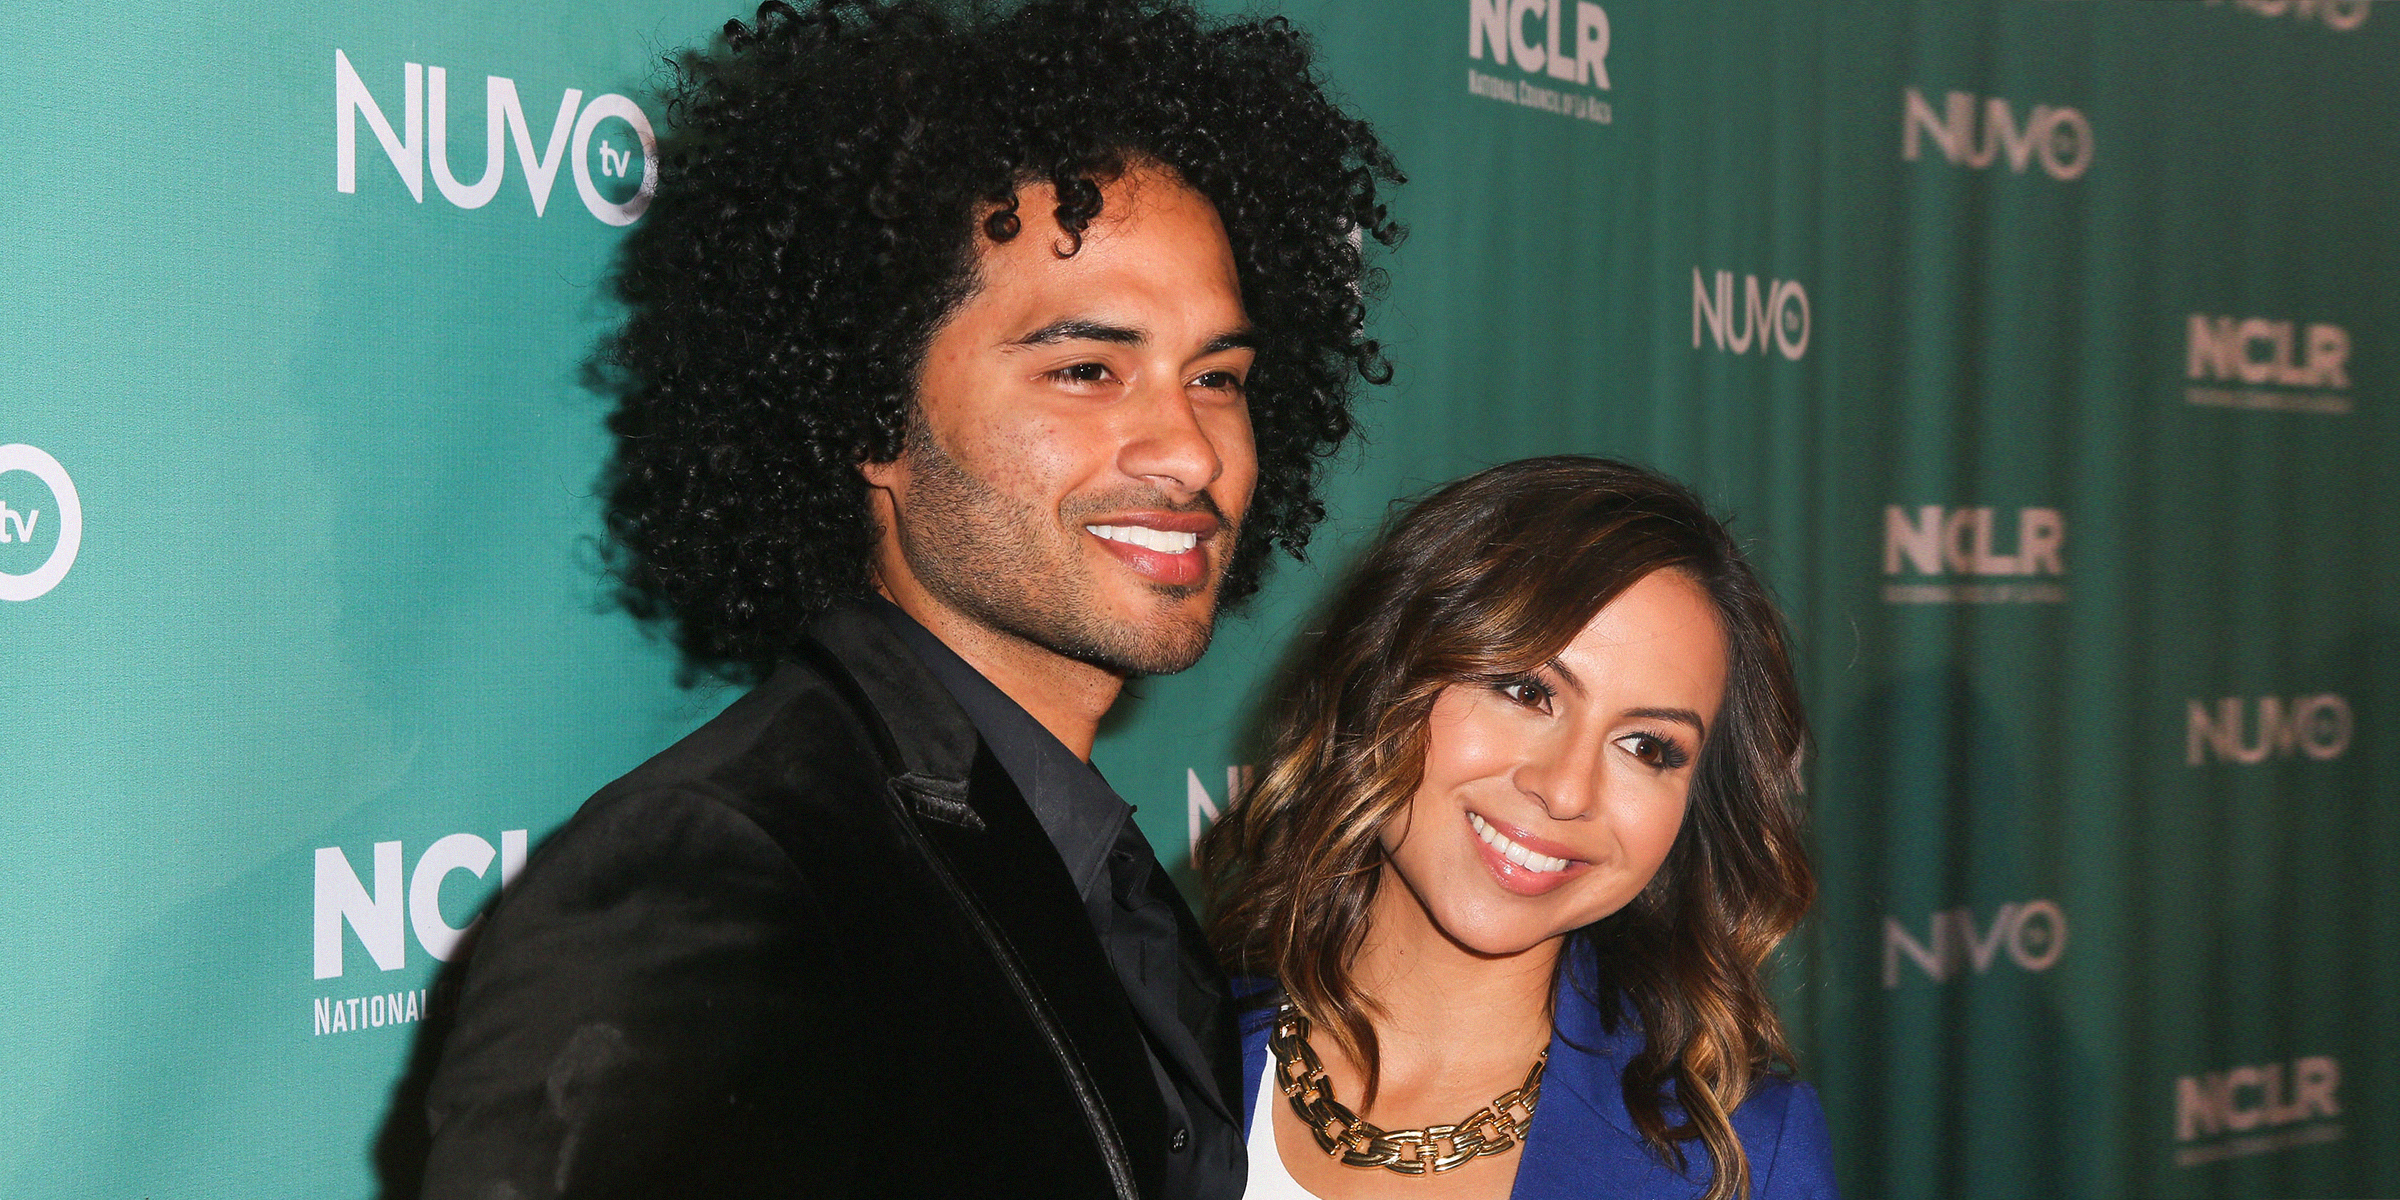 Manwell Reyes and Anjelah Johnson | Source: Getty Images